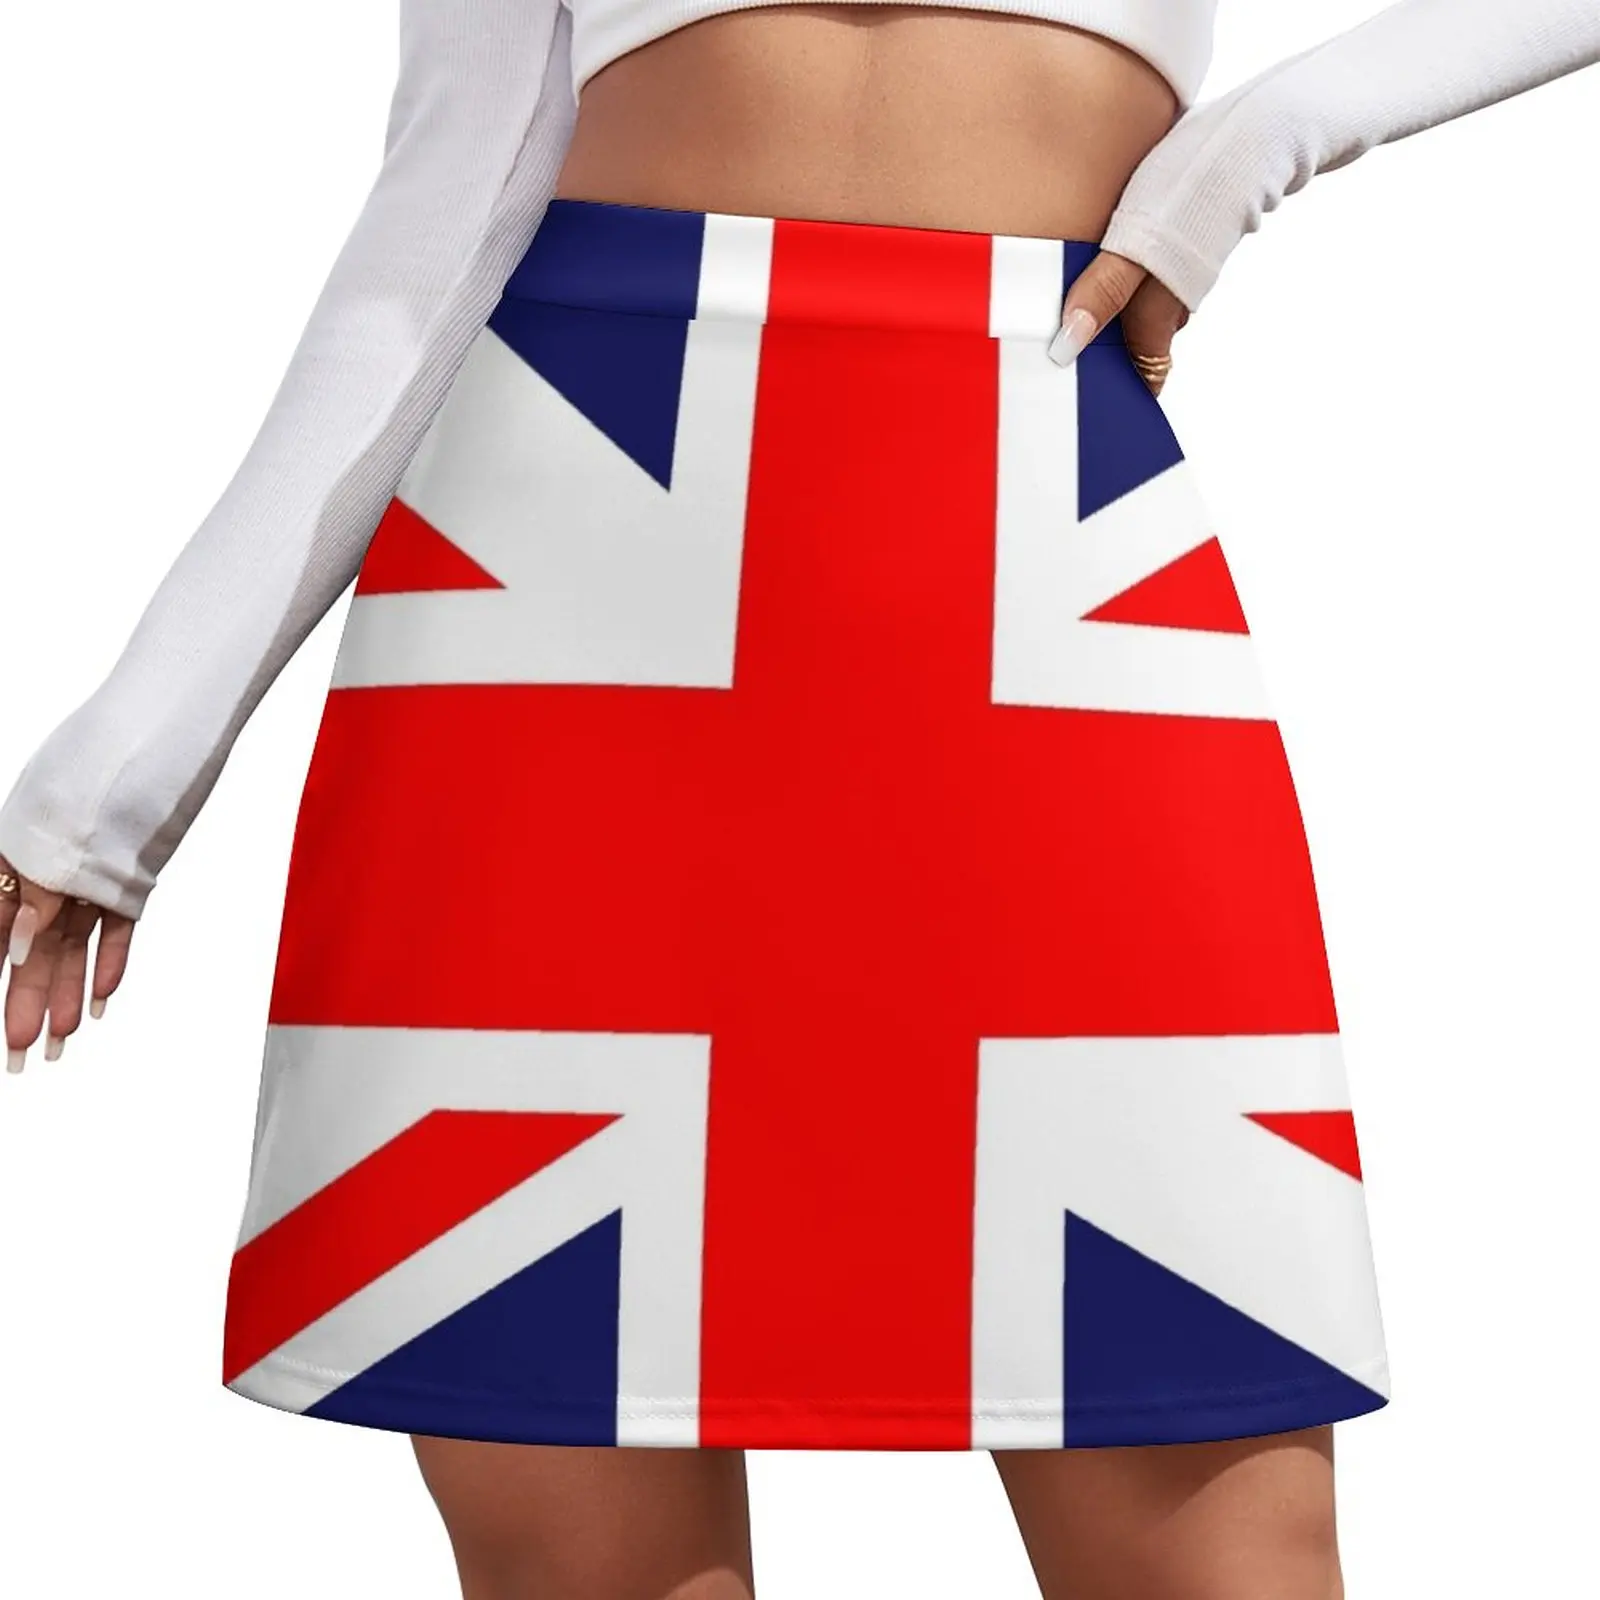 

Flag of Great Britain - Union Jack Mini Skirt rave outfits for women fashion korean clothing festival outfit women